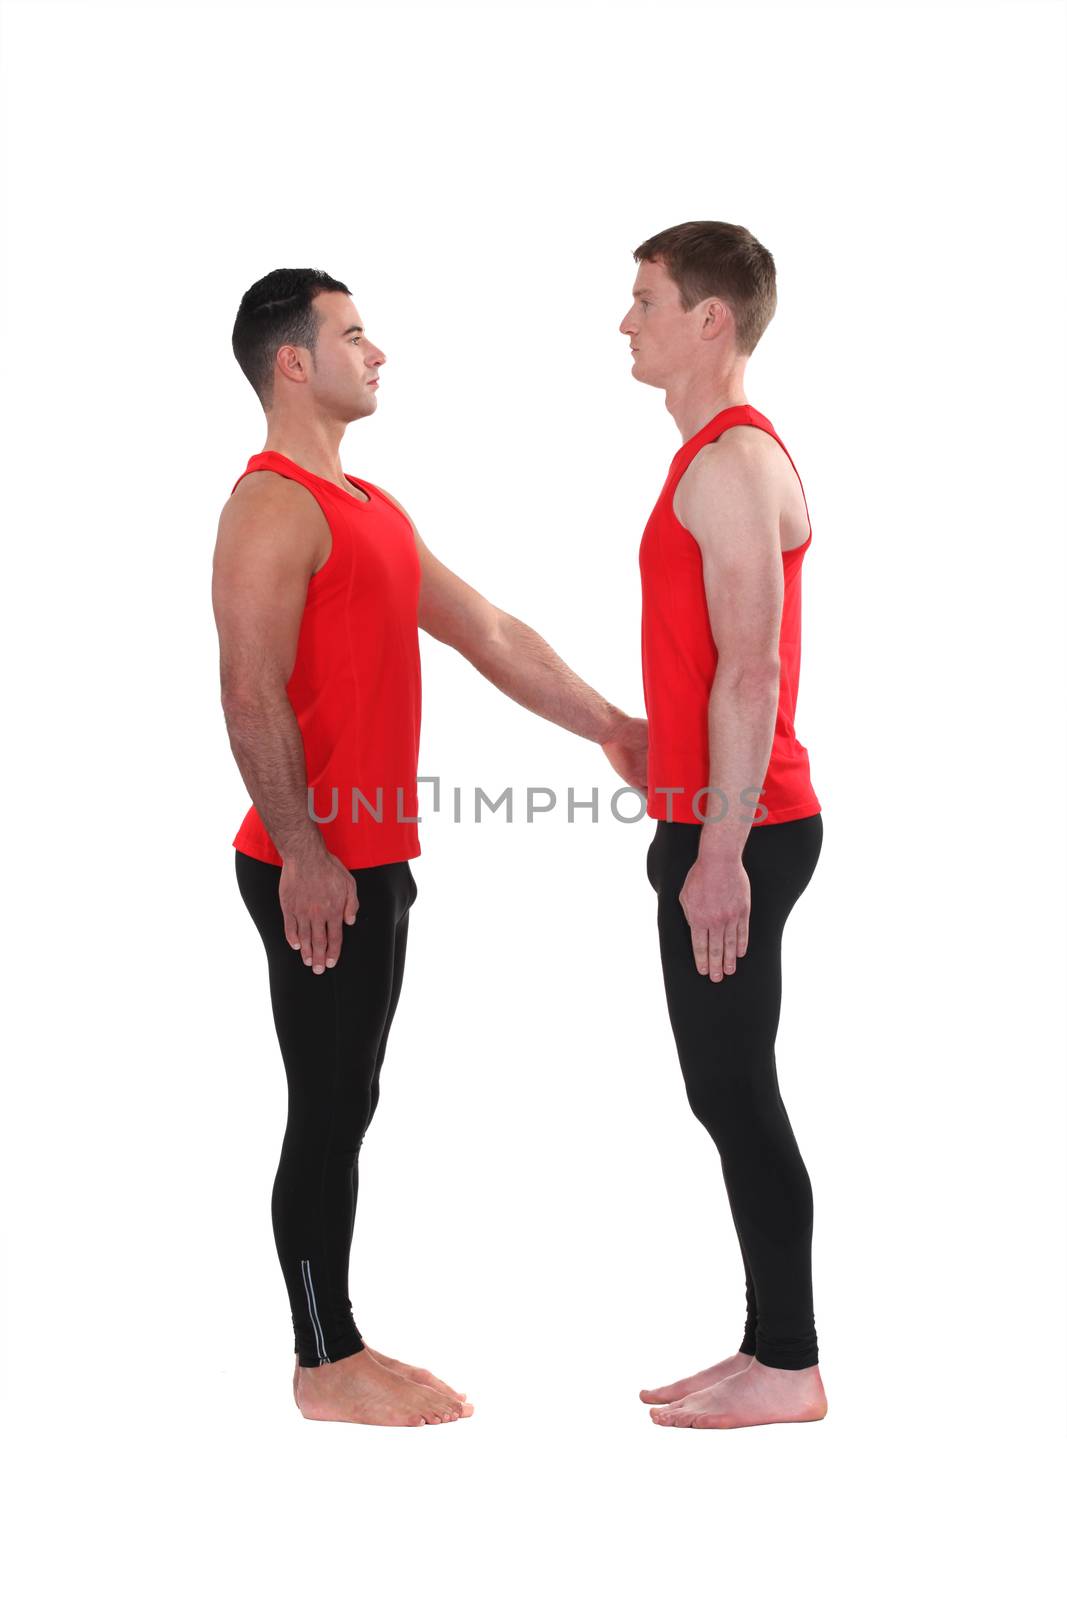 Two male gymnasts